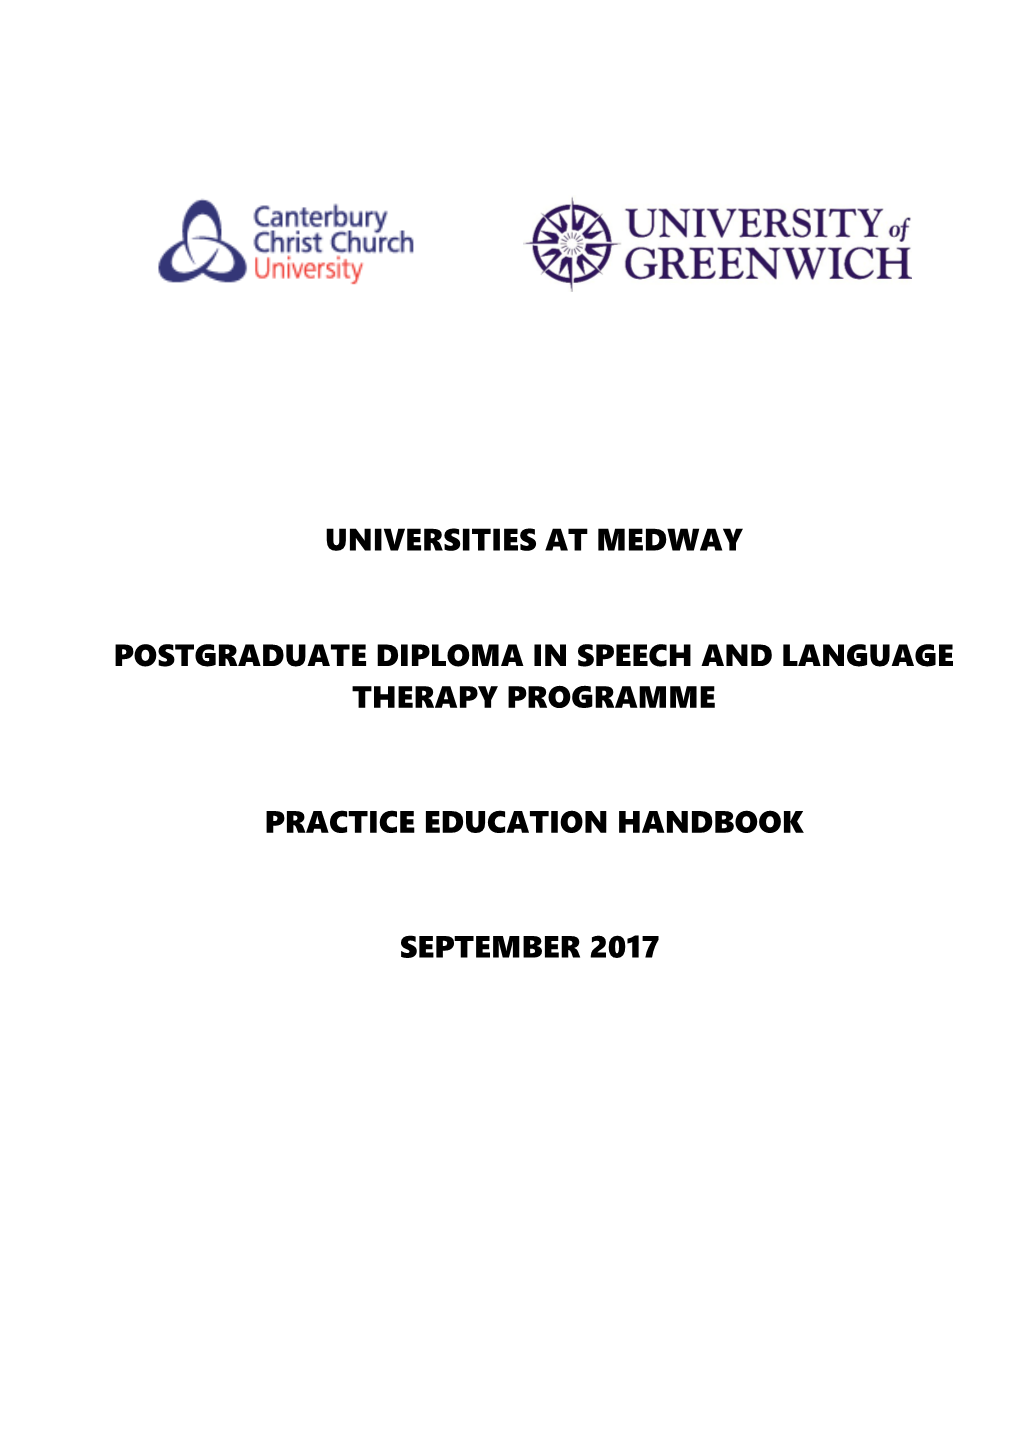 Postgraduate Diploma in Speech and Language Therapy Programme